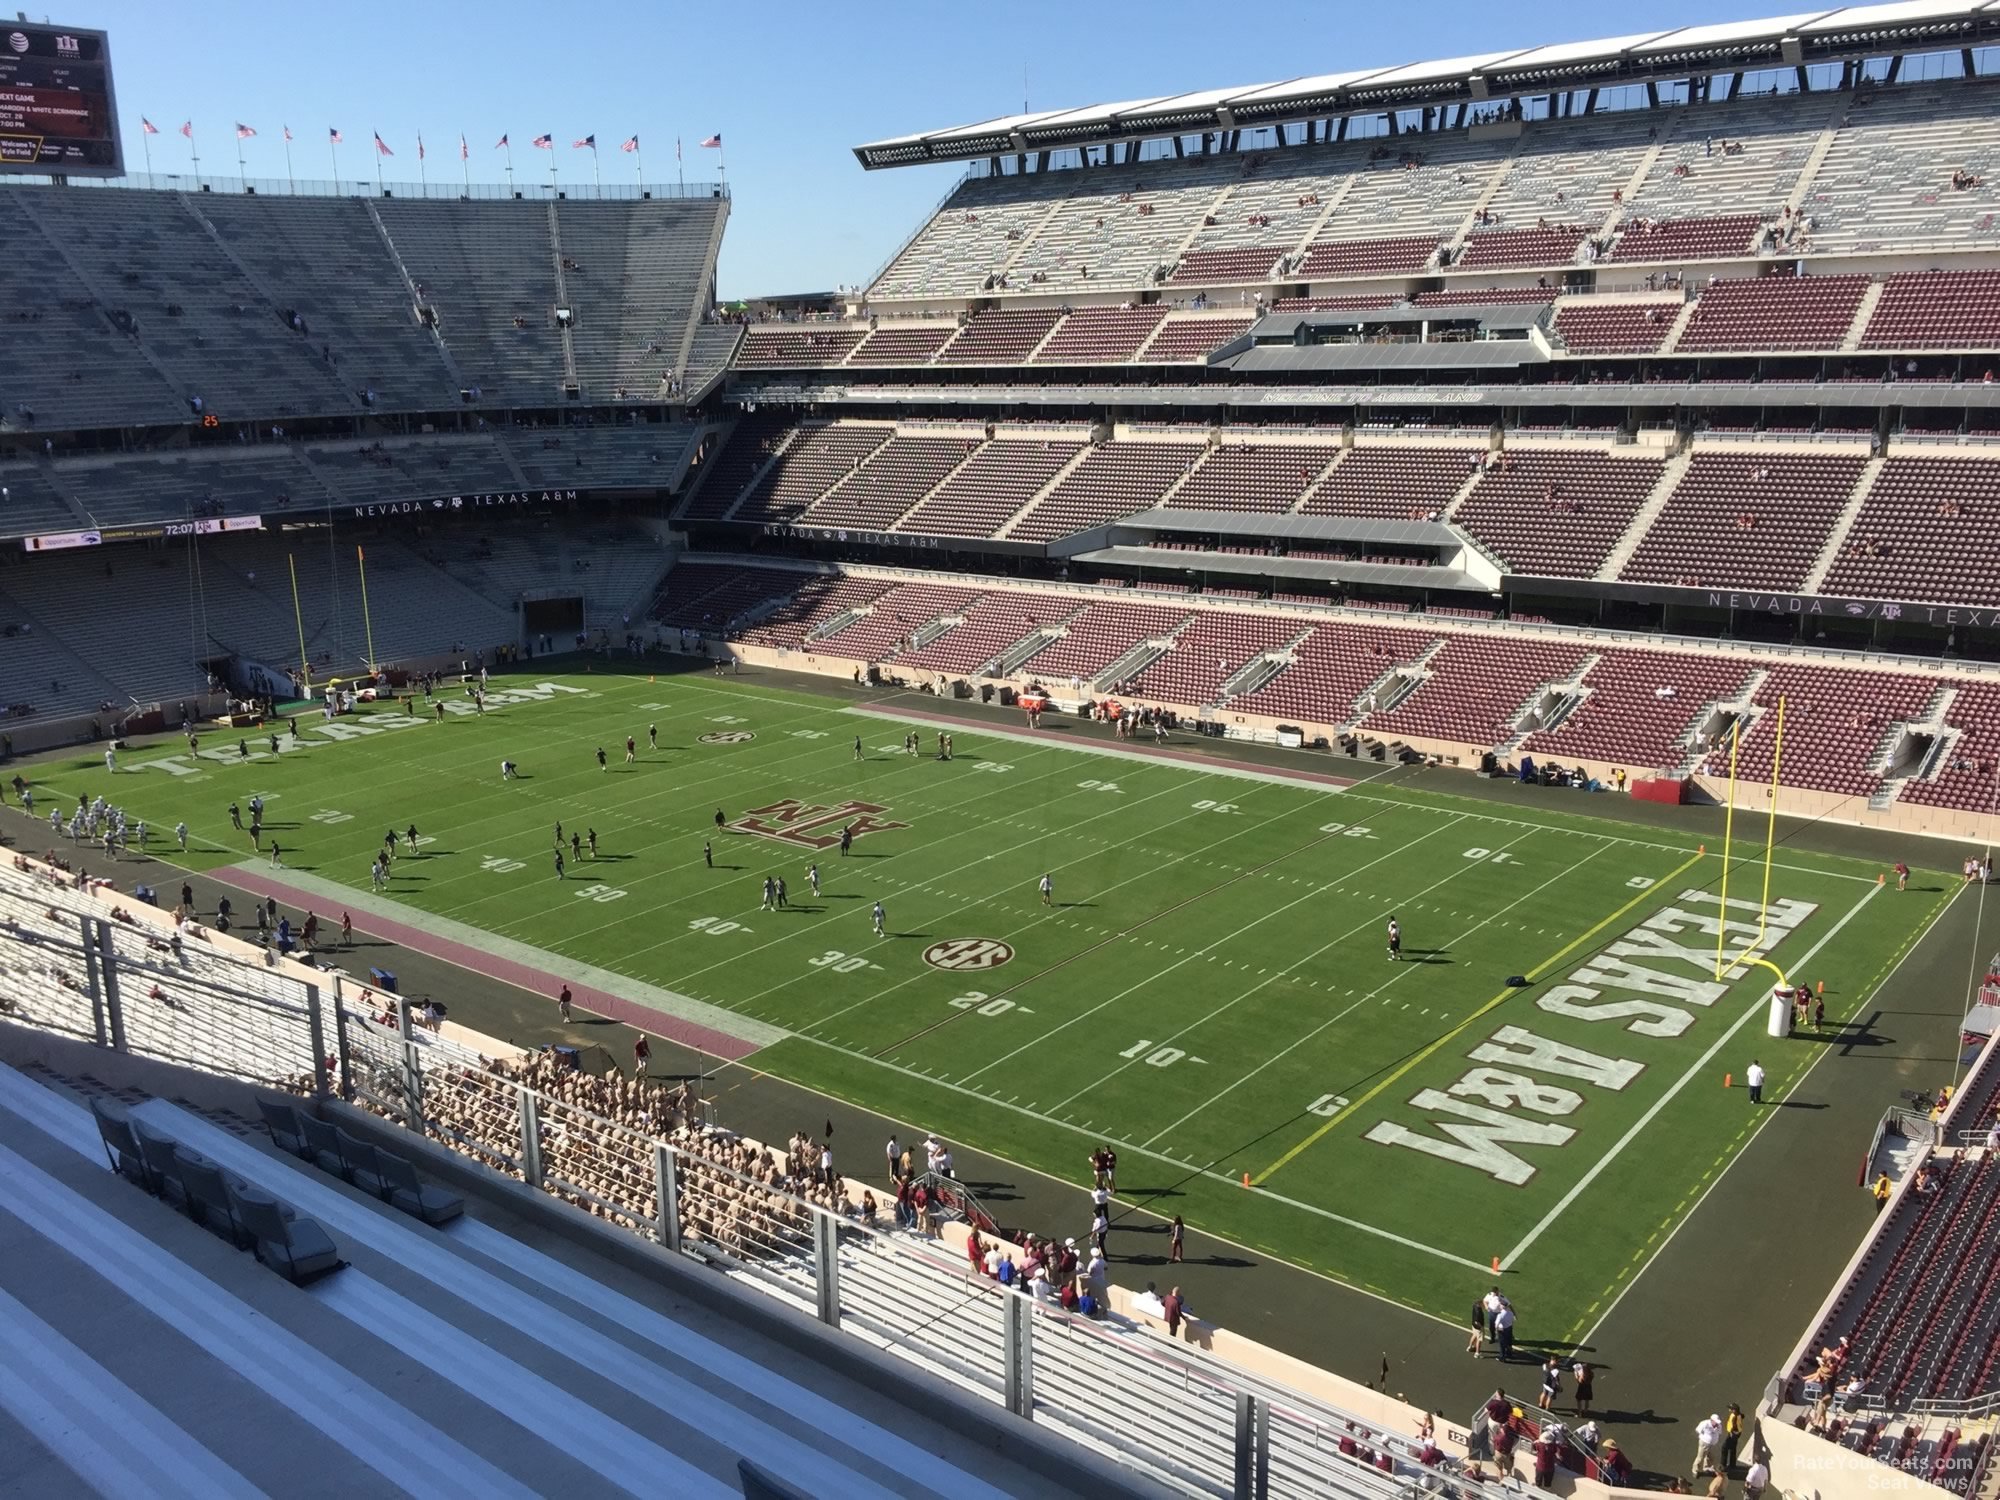 section 329, row 6 seat view  - kyle field